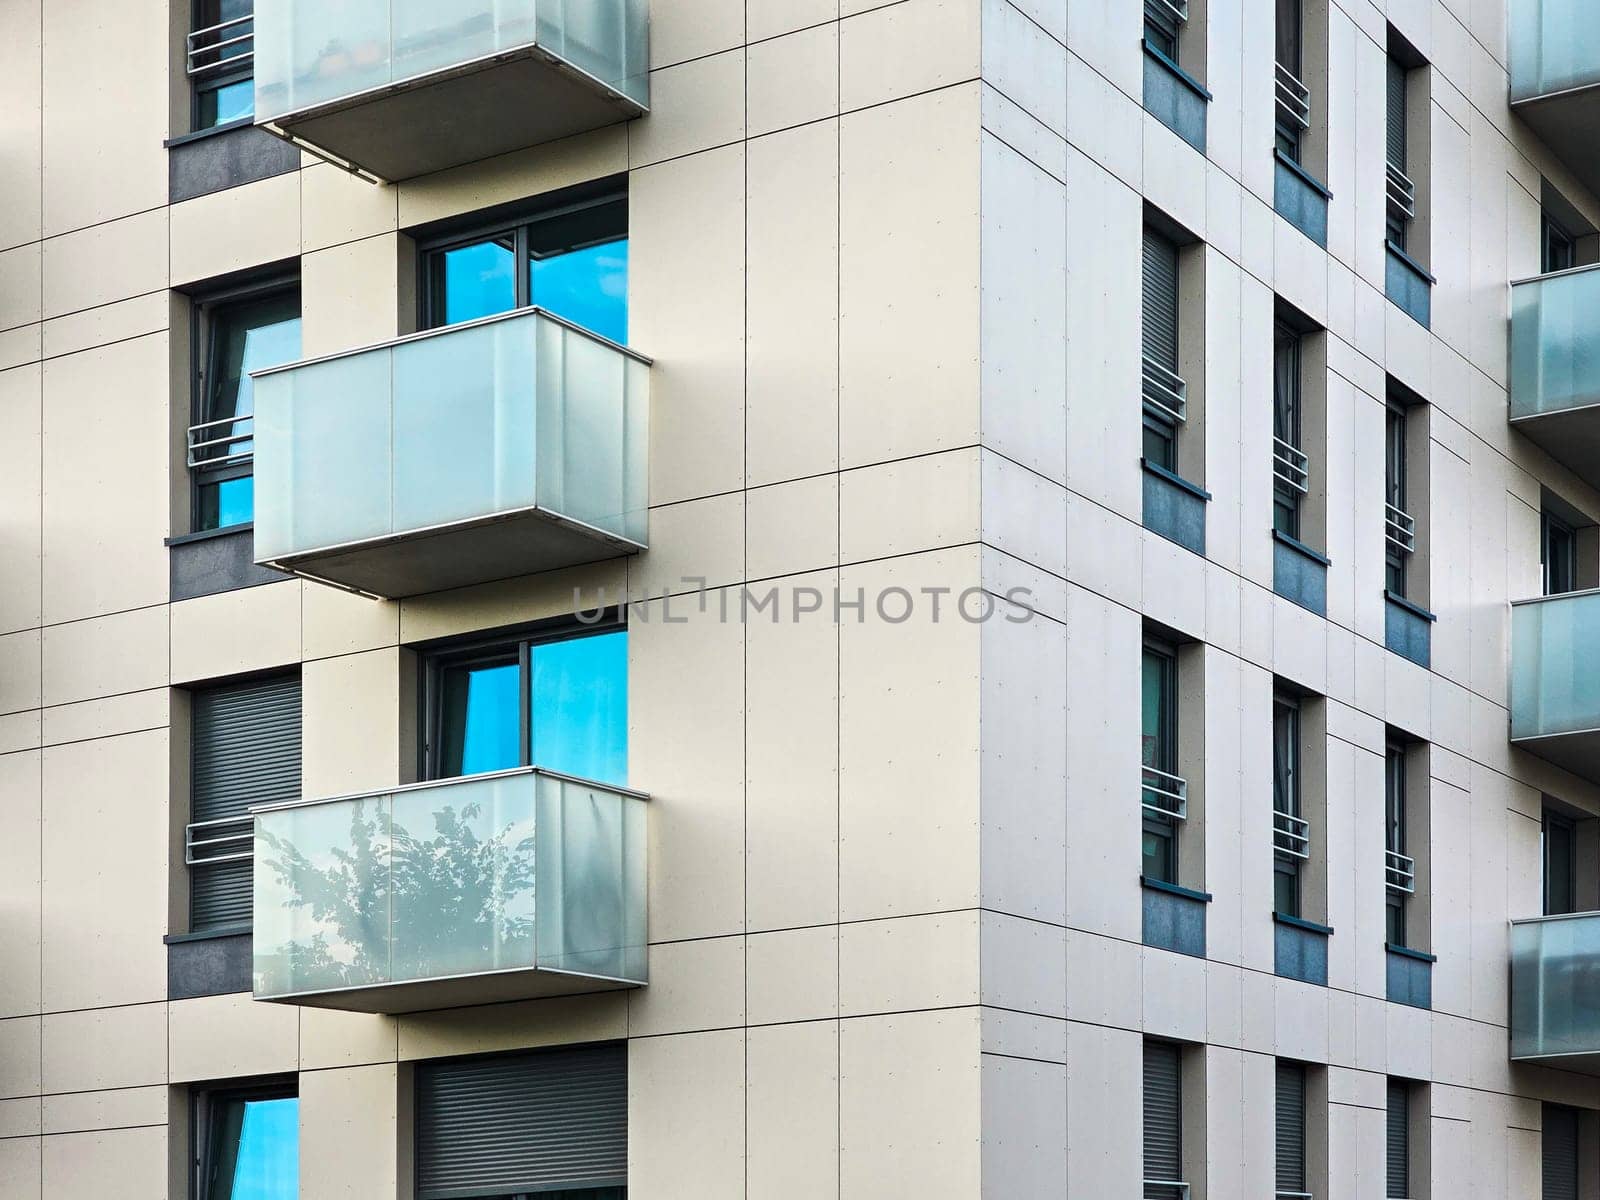 Architectural details of a modern residential building. A modern European apartment complex